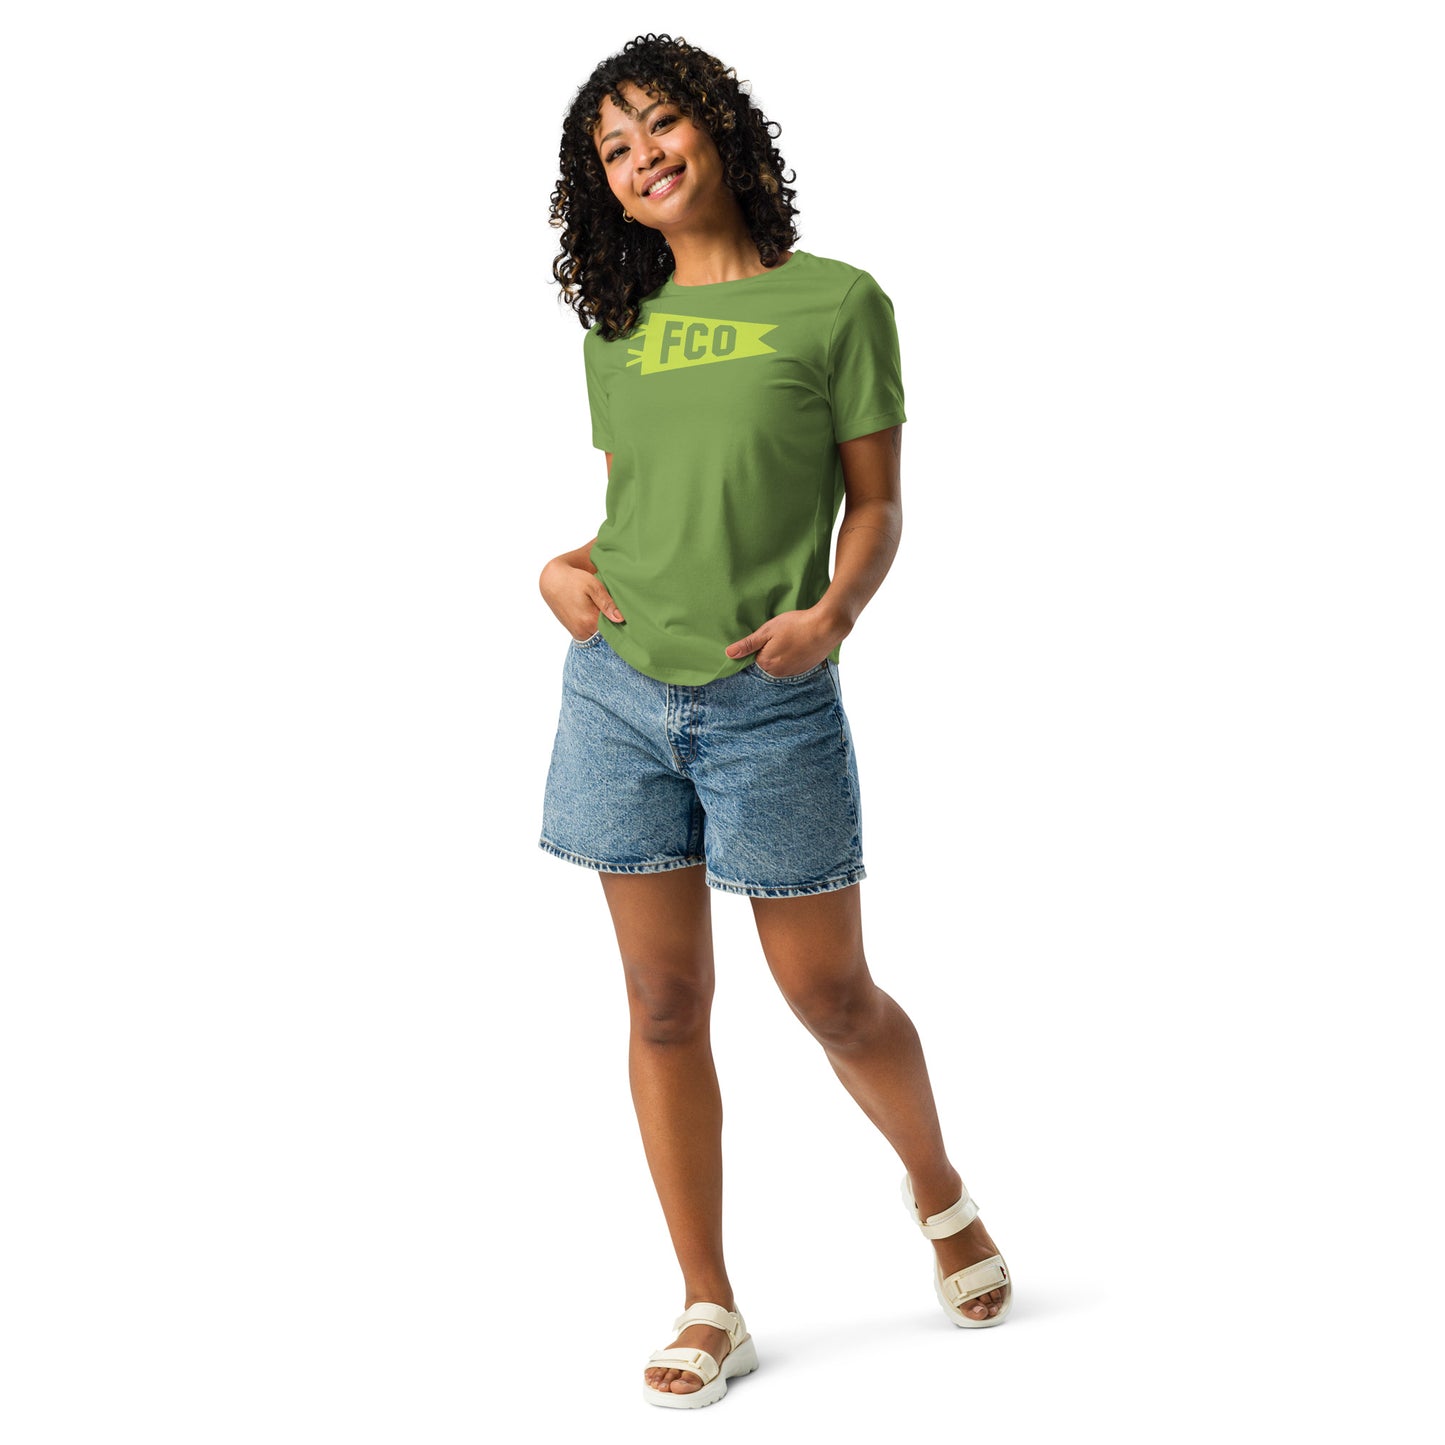 Airport Code Women's Tee - Green Graphic • FCO Rome • YHM Designs - Image 08